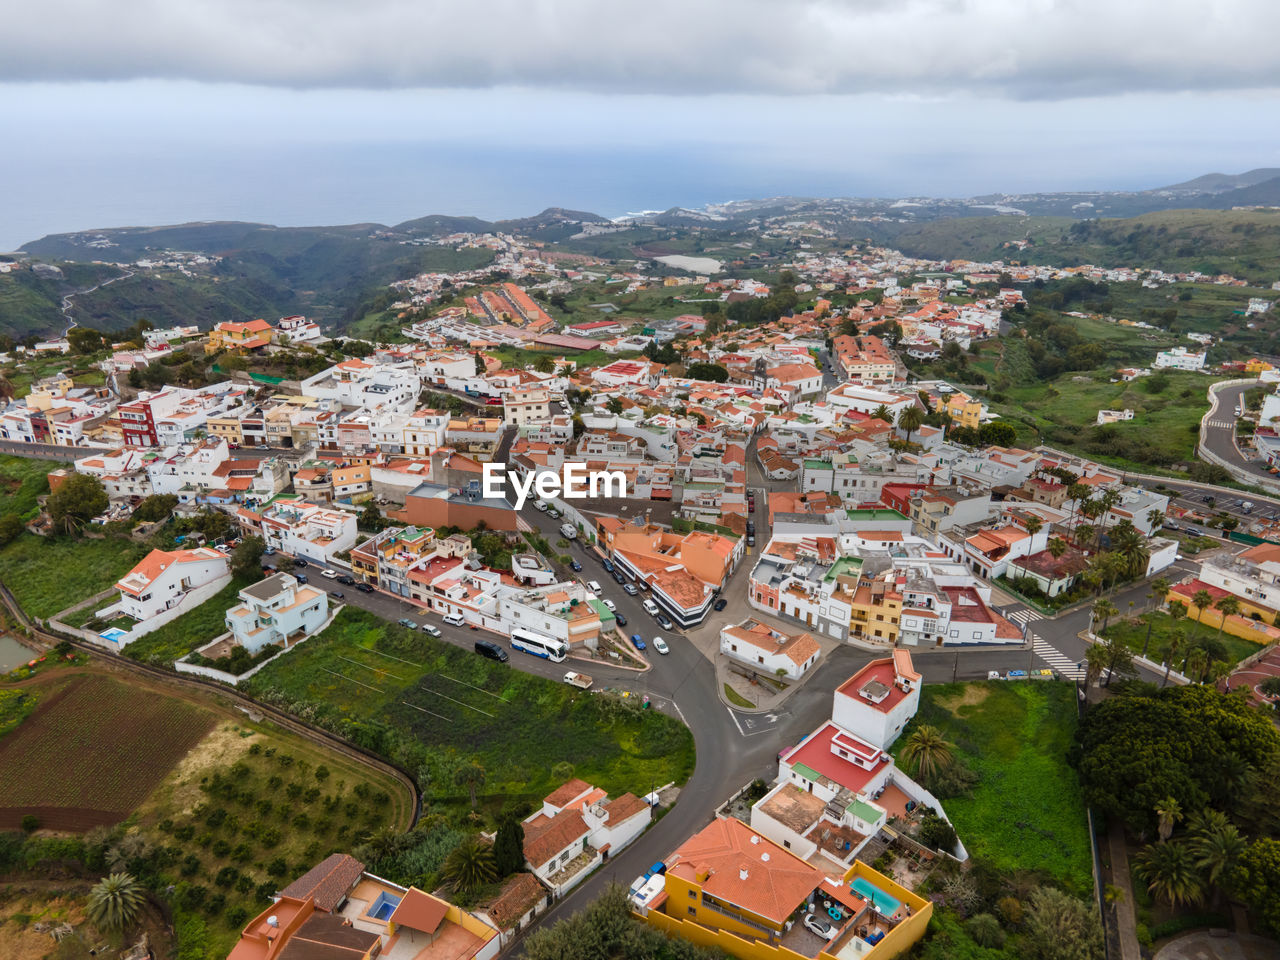 Aerial view on firgas in gran canaria